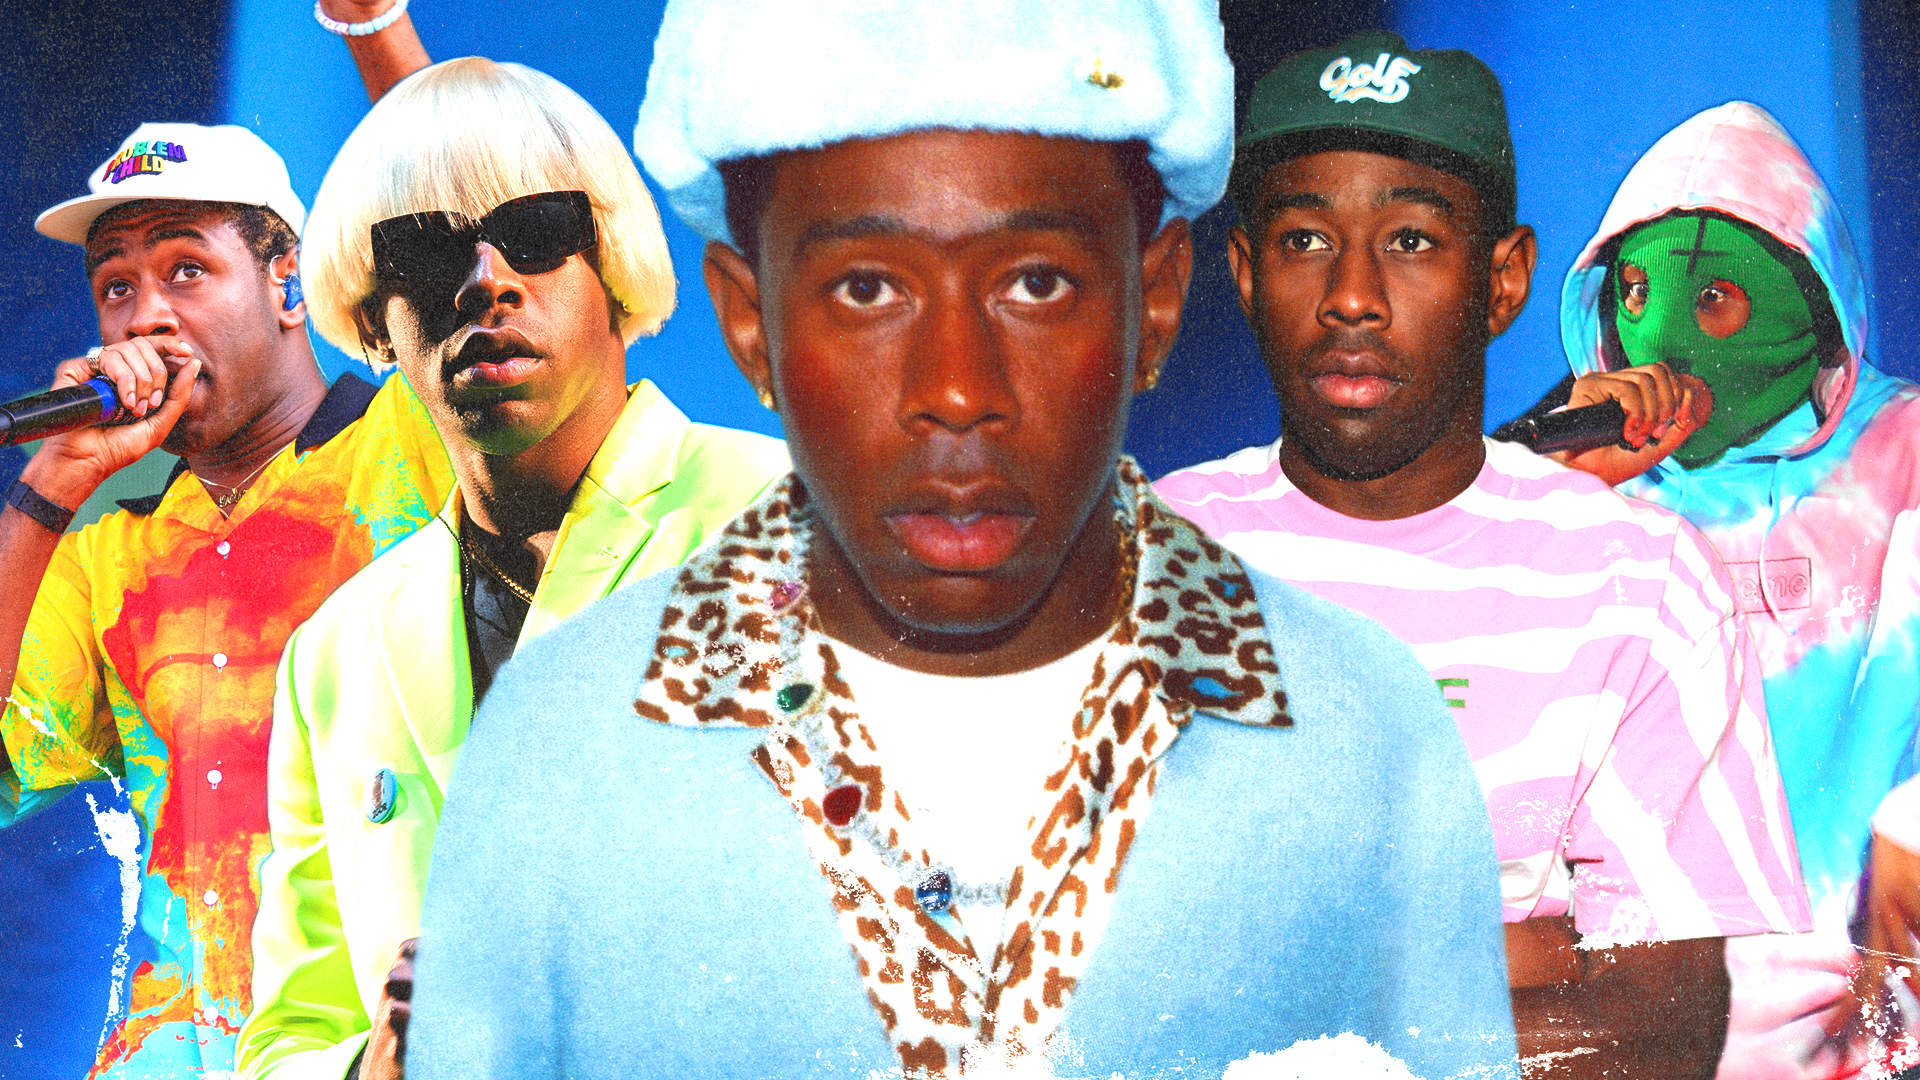 Tyler, The Creator: albums, songs, playlists